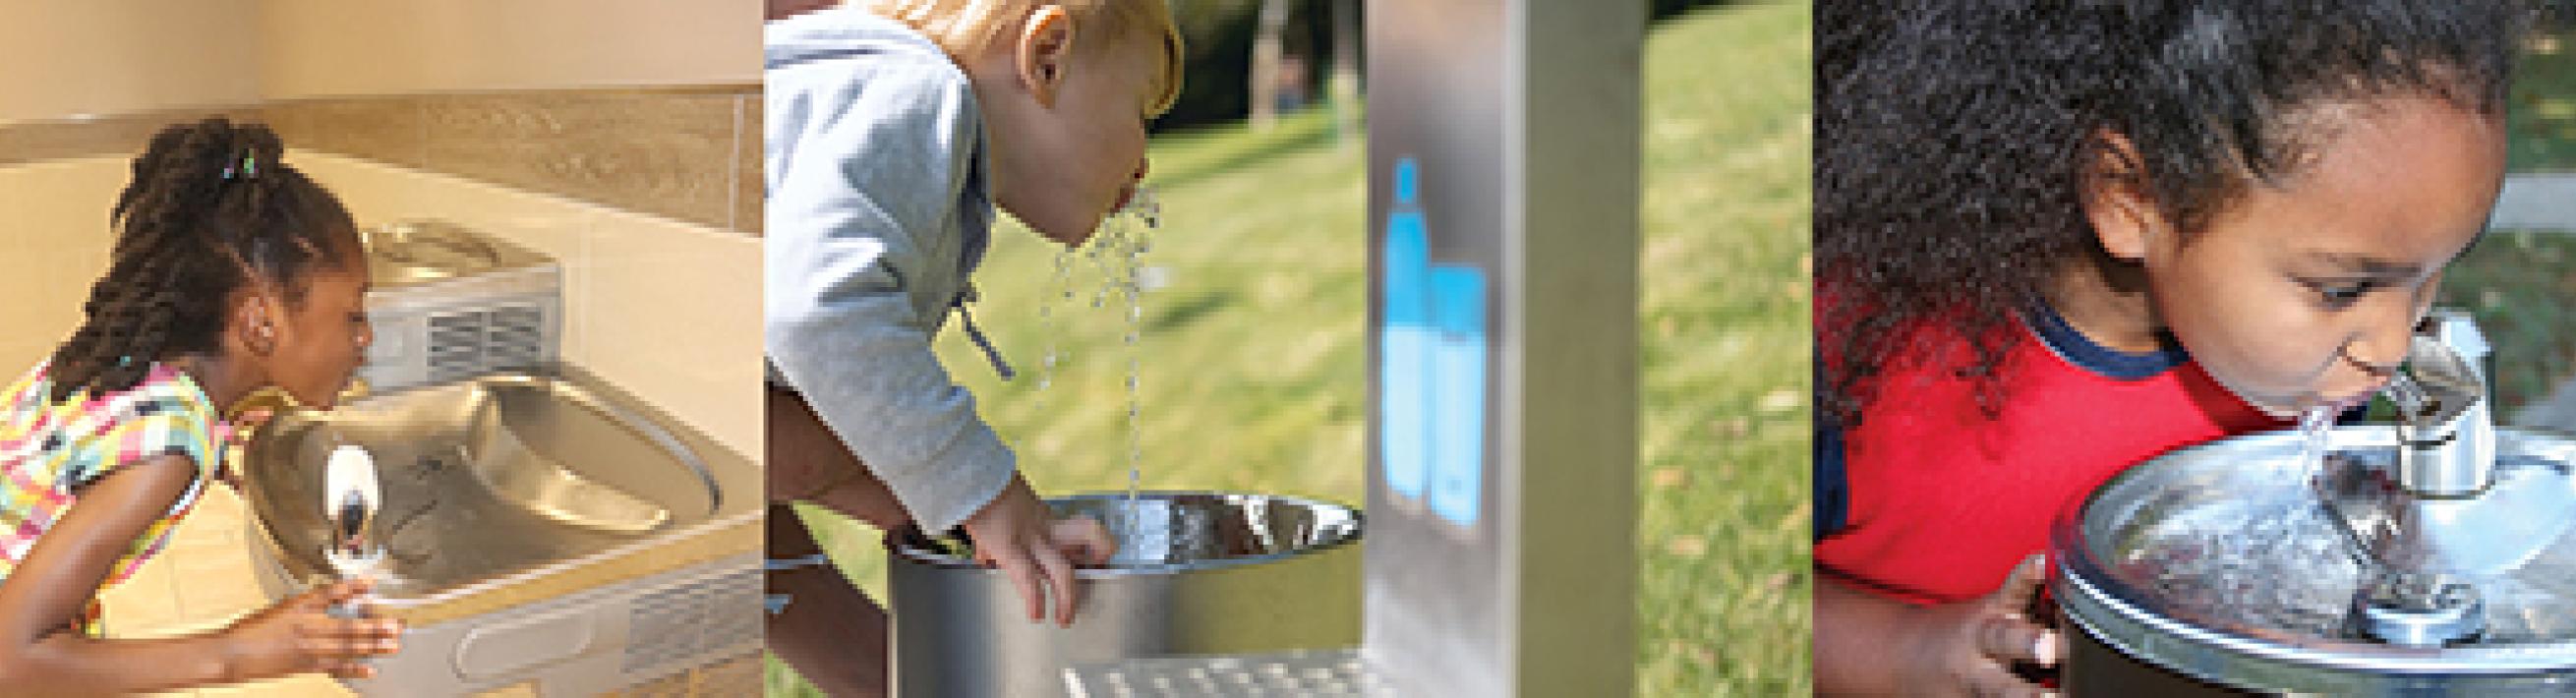 kids drinking from drinking fountains